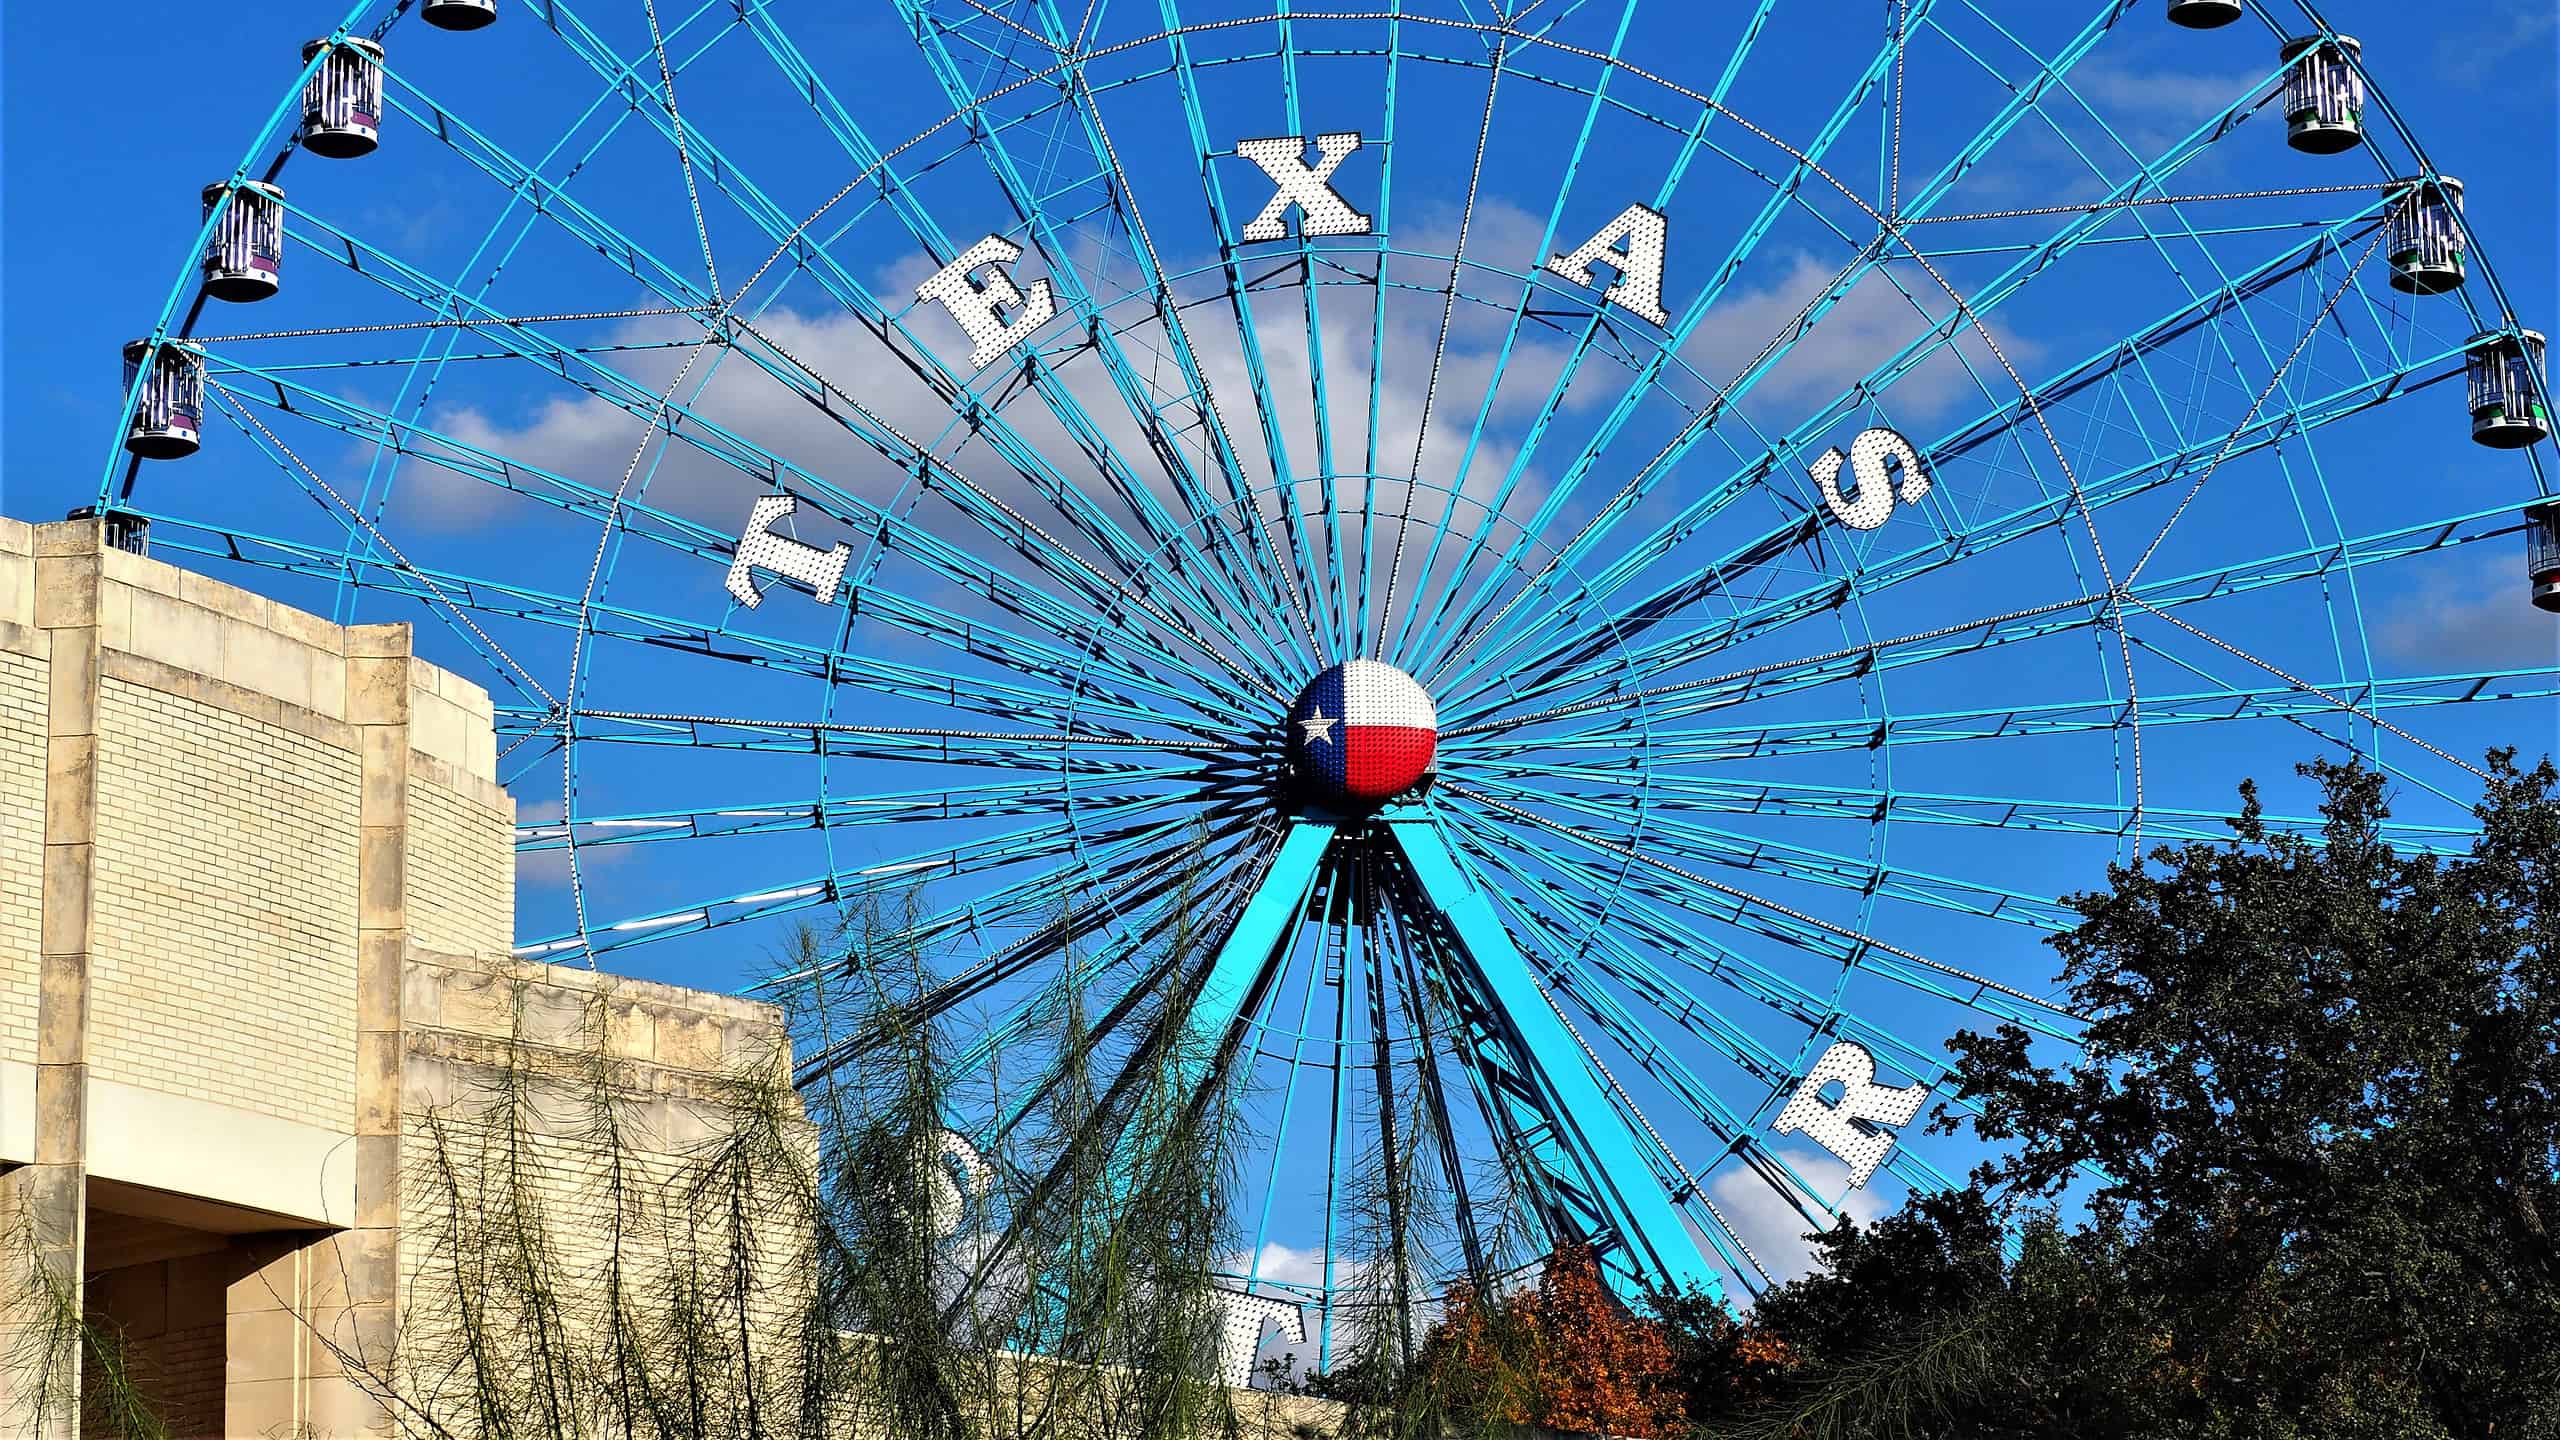 A closeup shot of the Texas Star, the largest ferris wheel in North America.